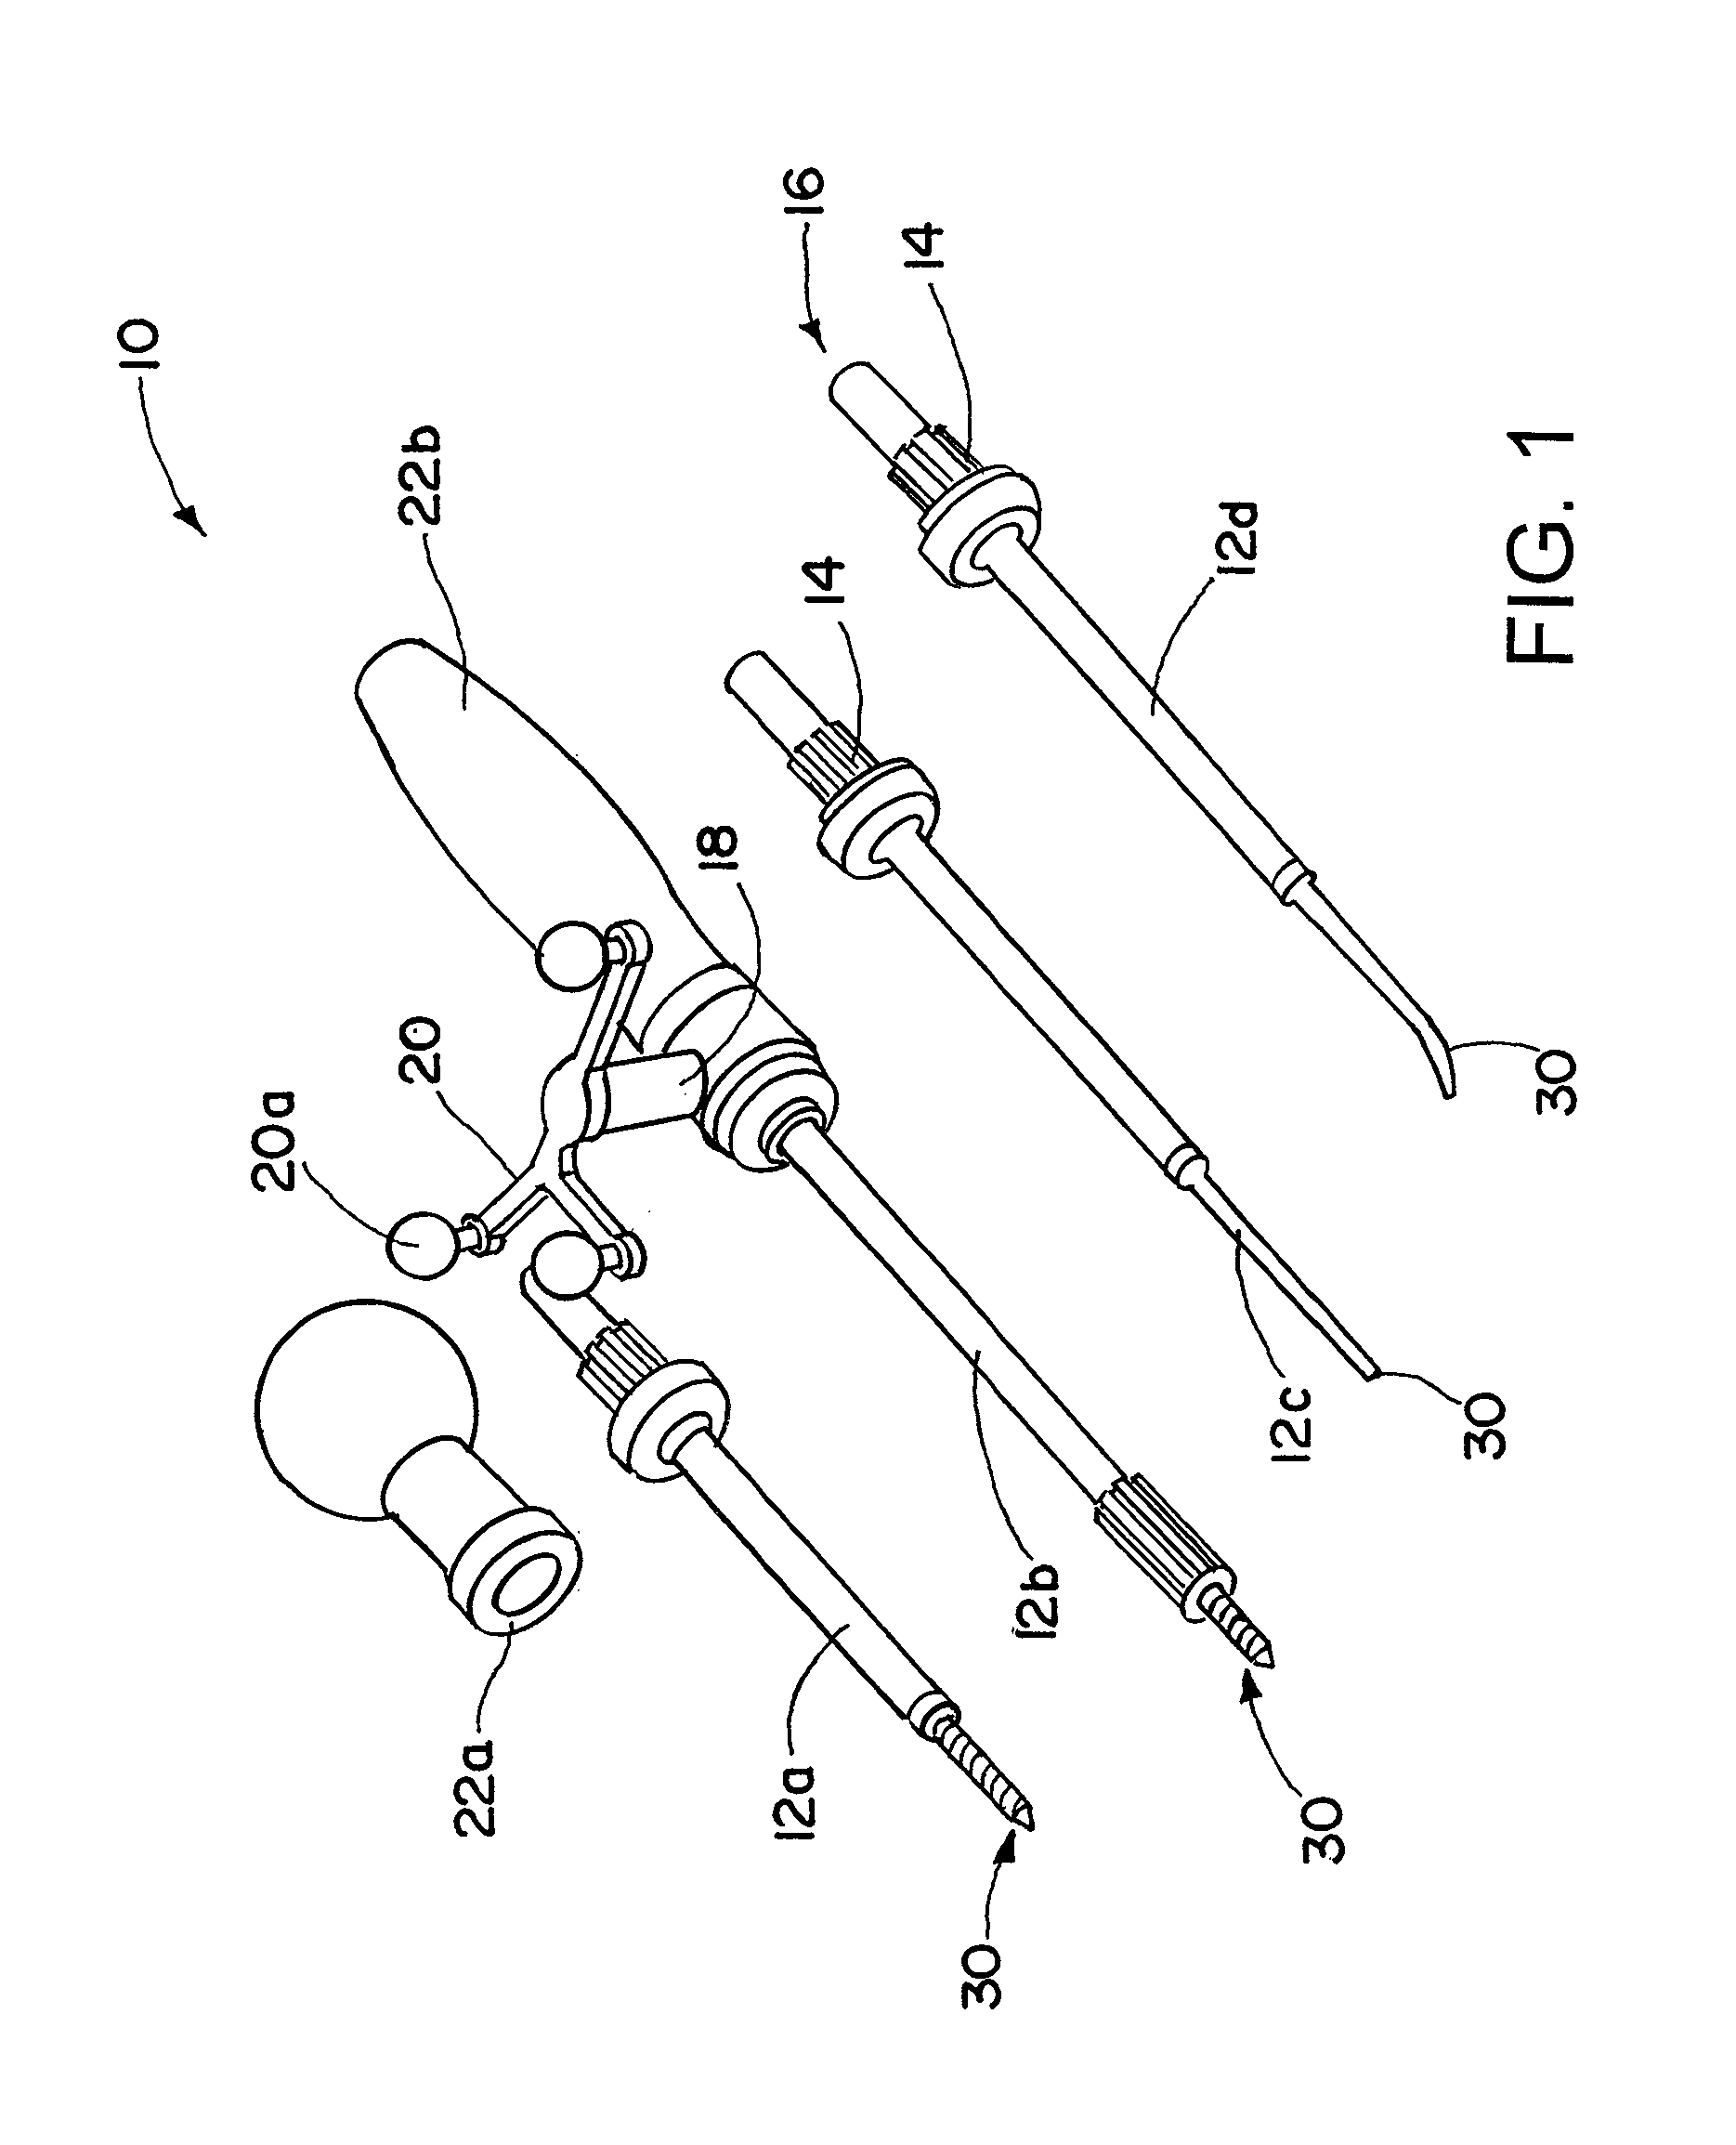 Universal instrument or instrument set for computer guided surgery